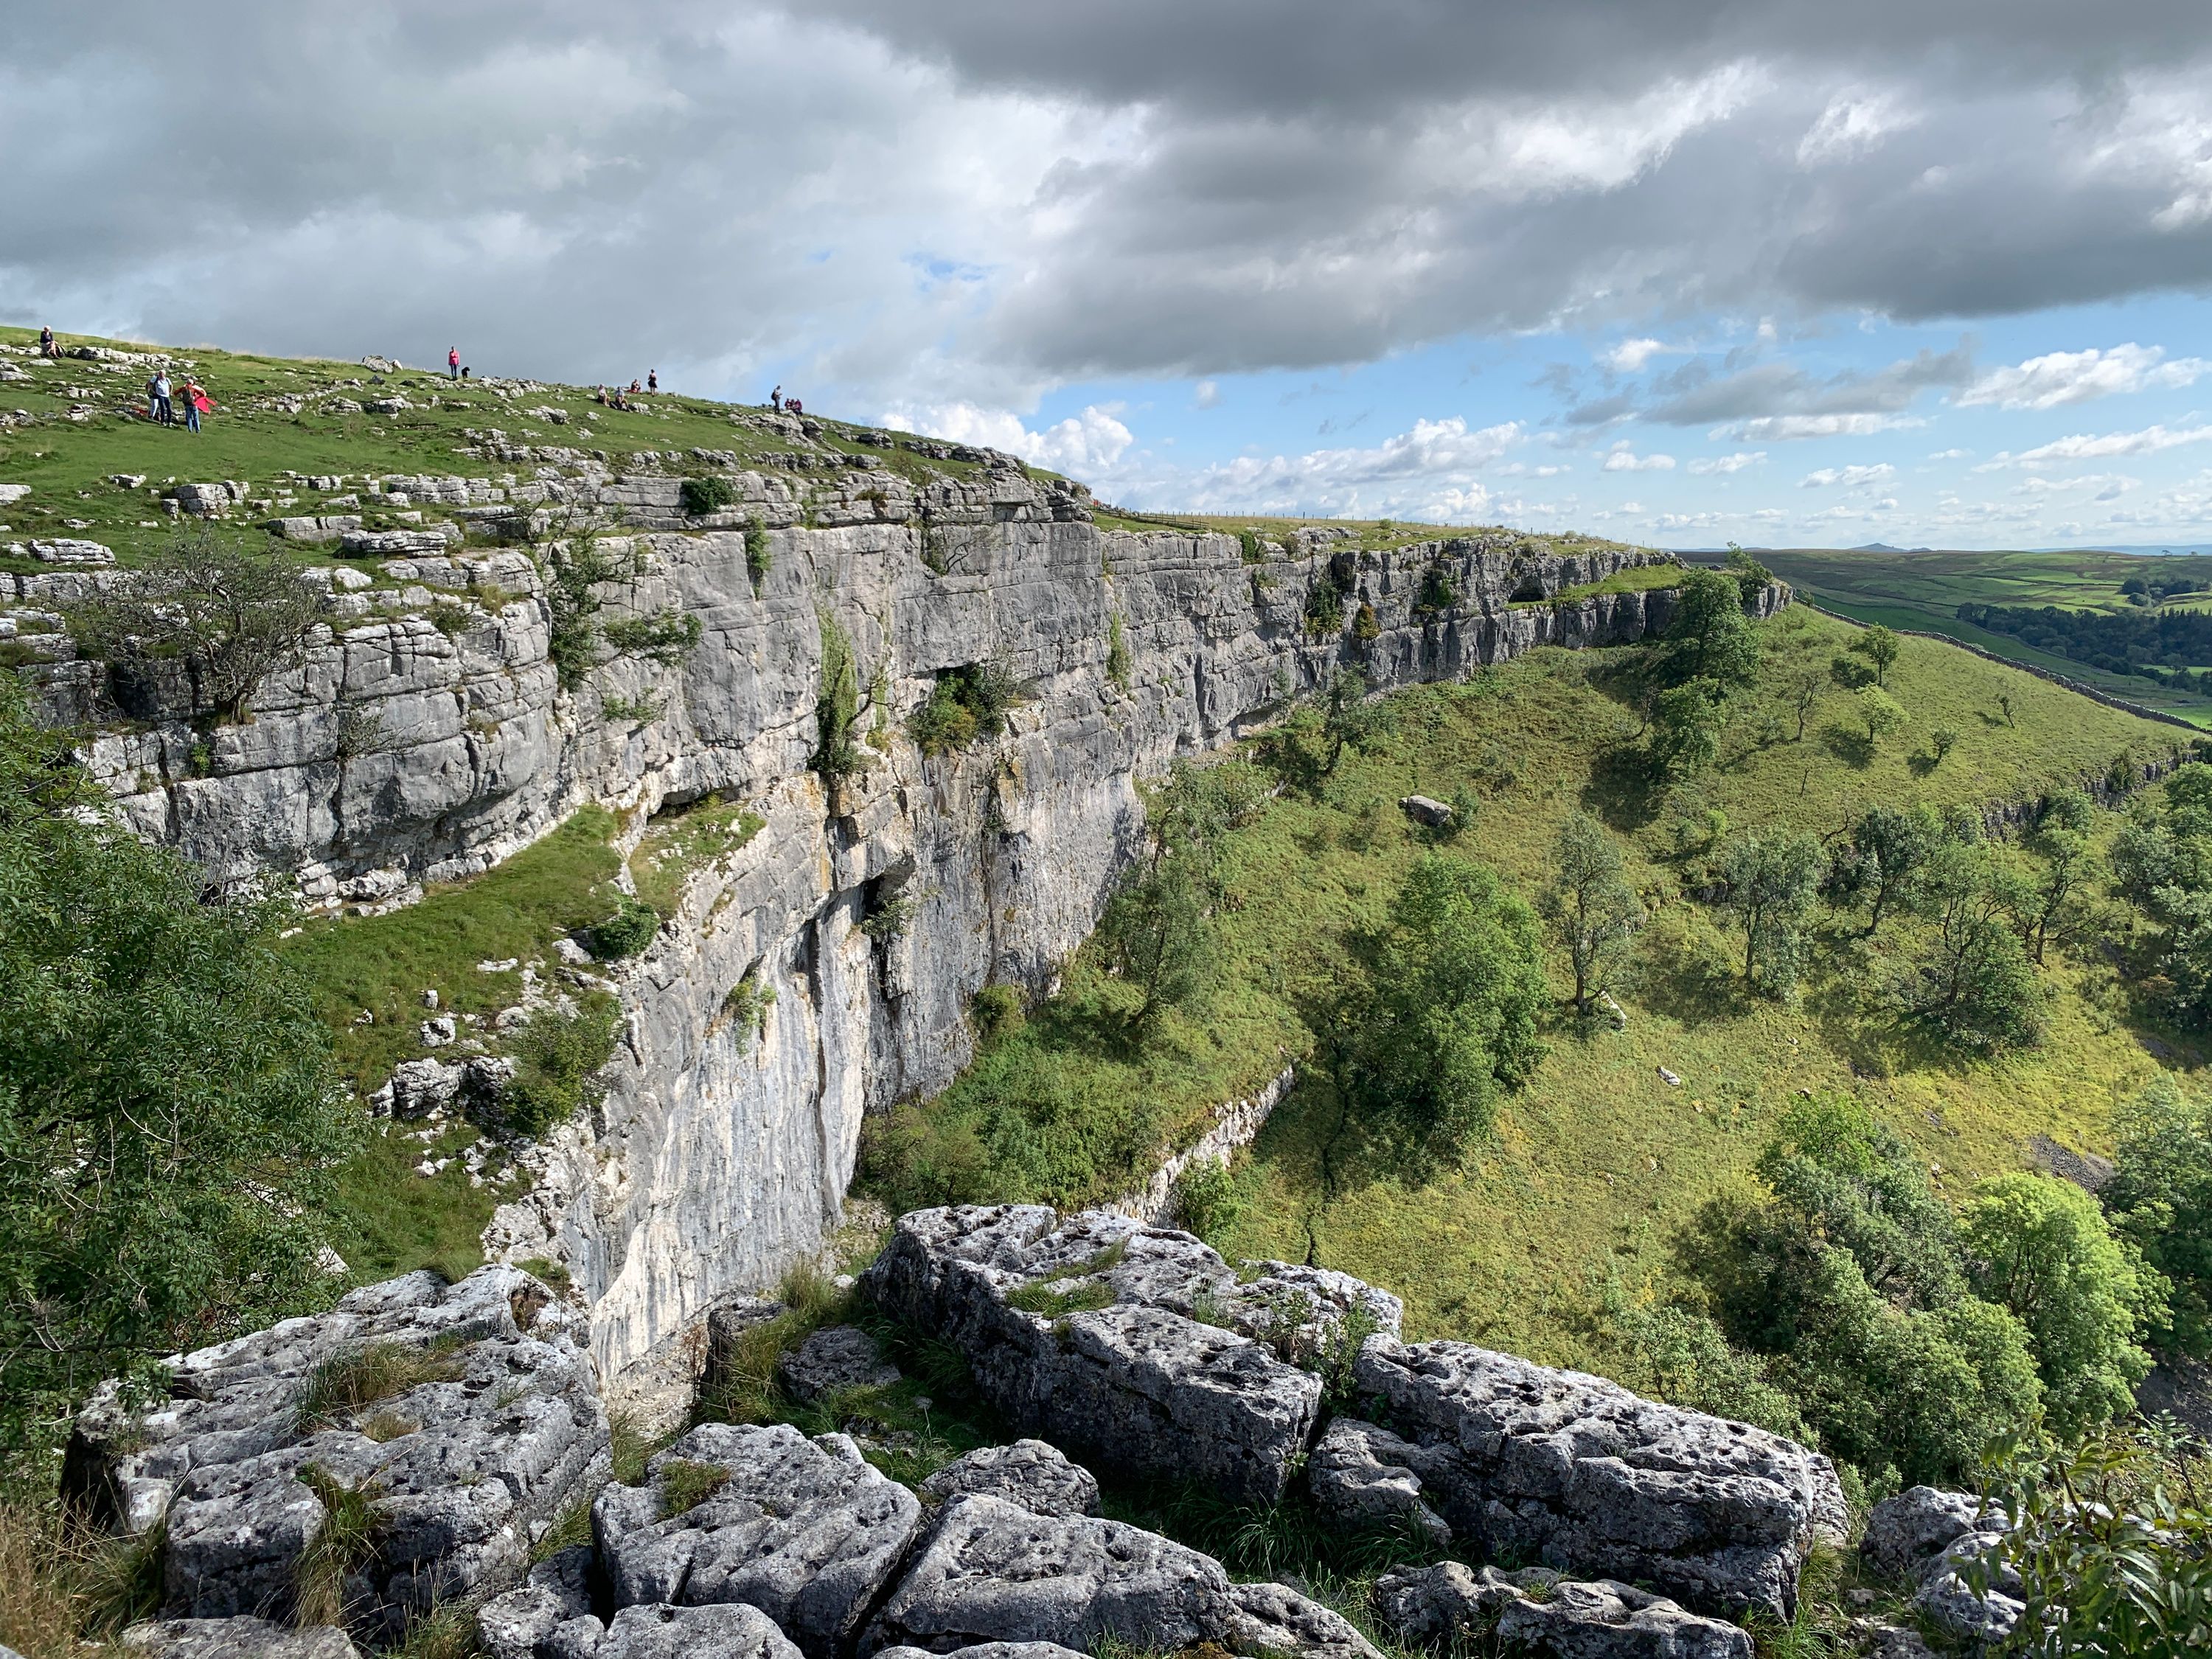 Malham Cove from the top